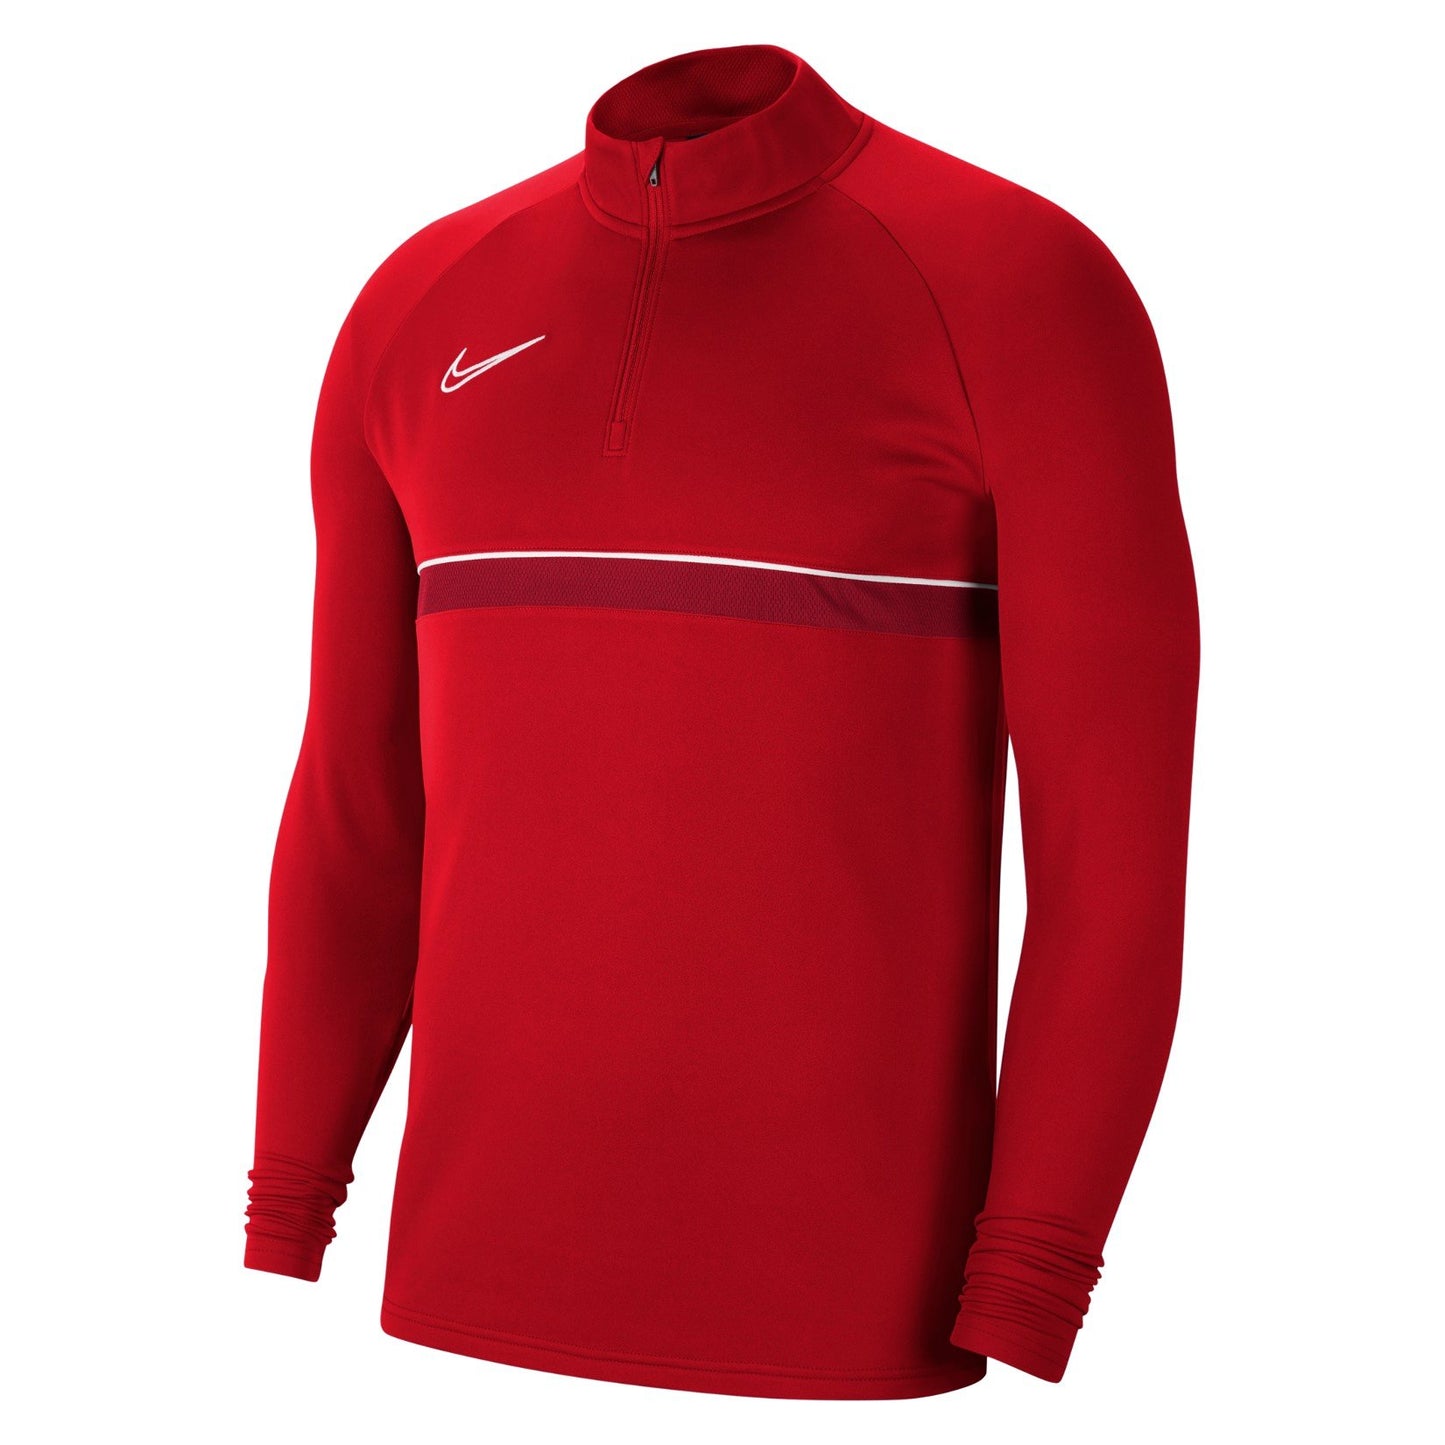 Nike Academy 21 Drill Top - Queensferry Sports